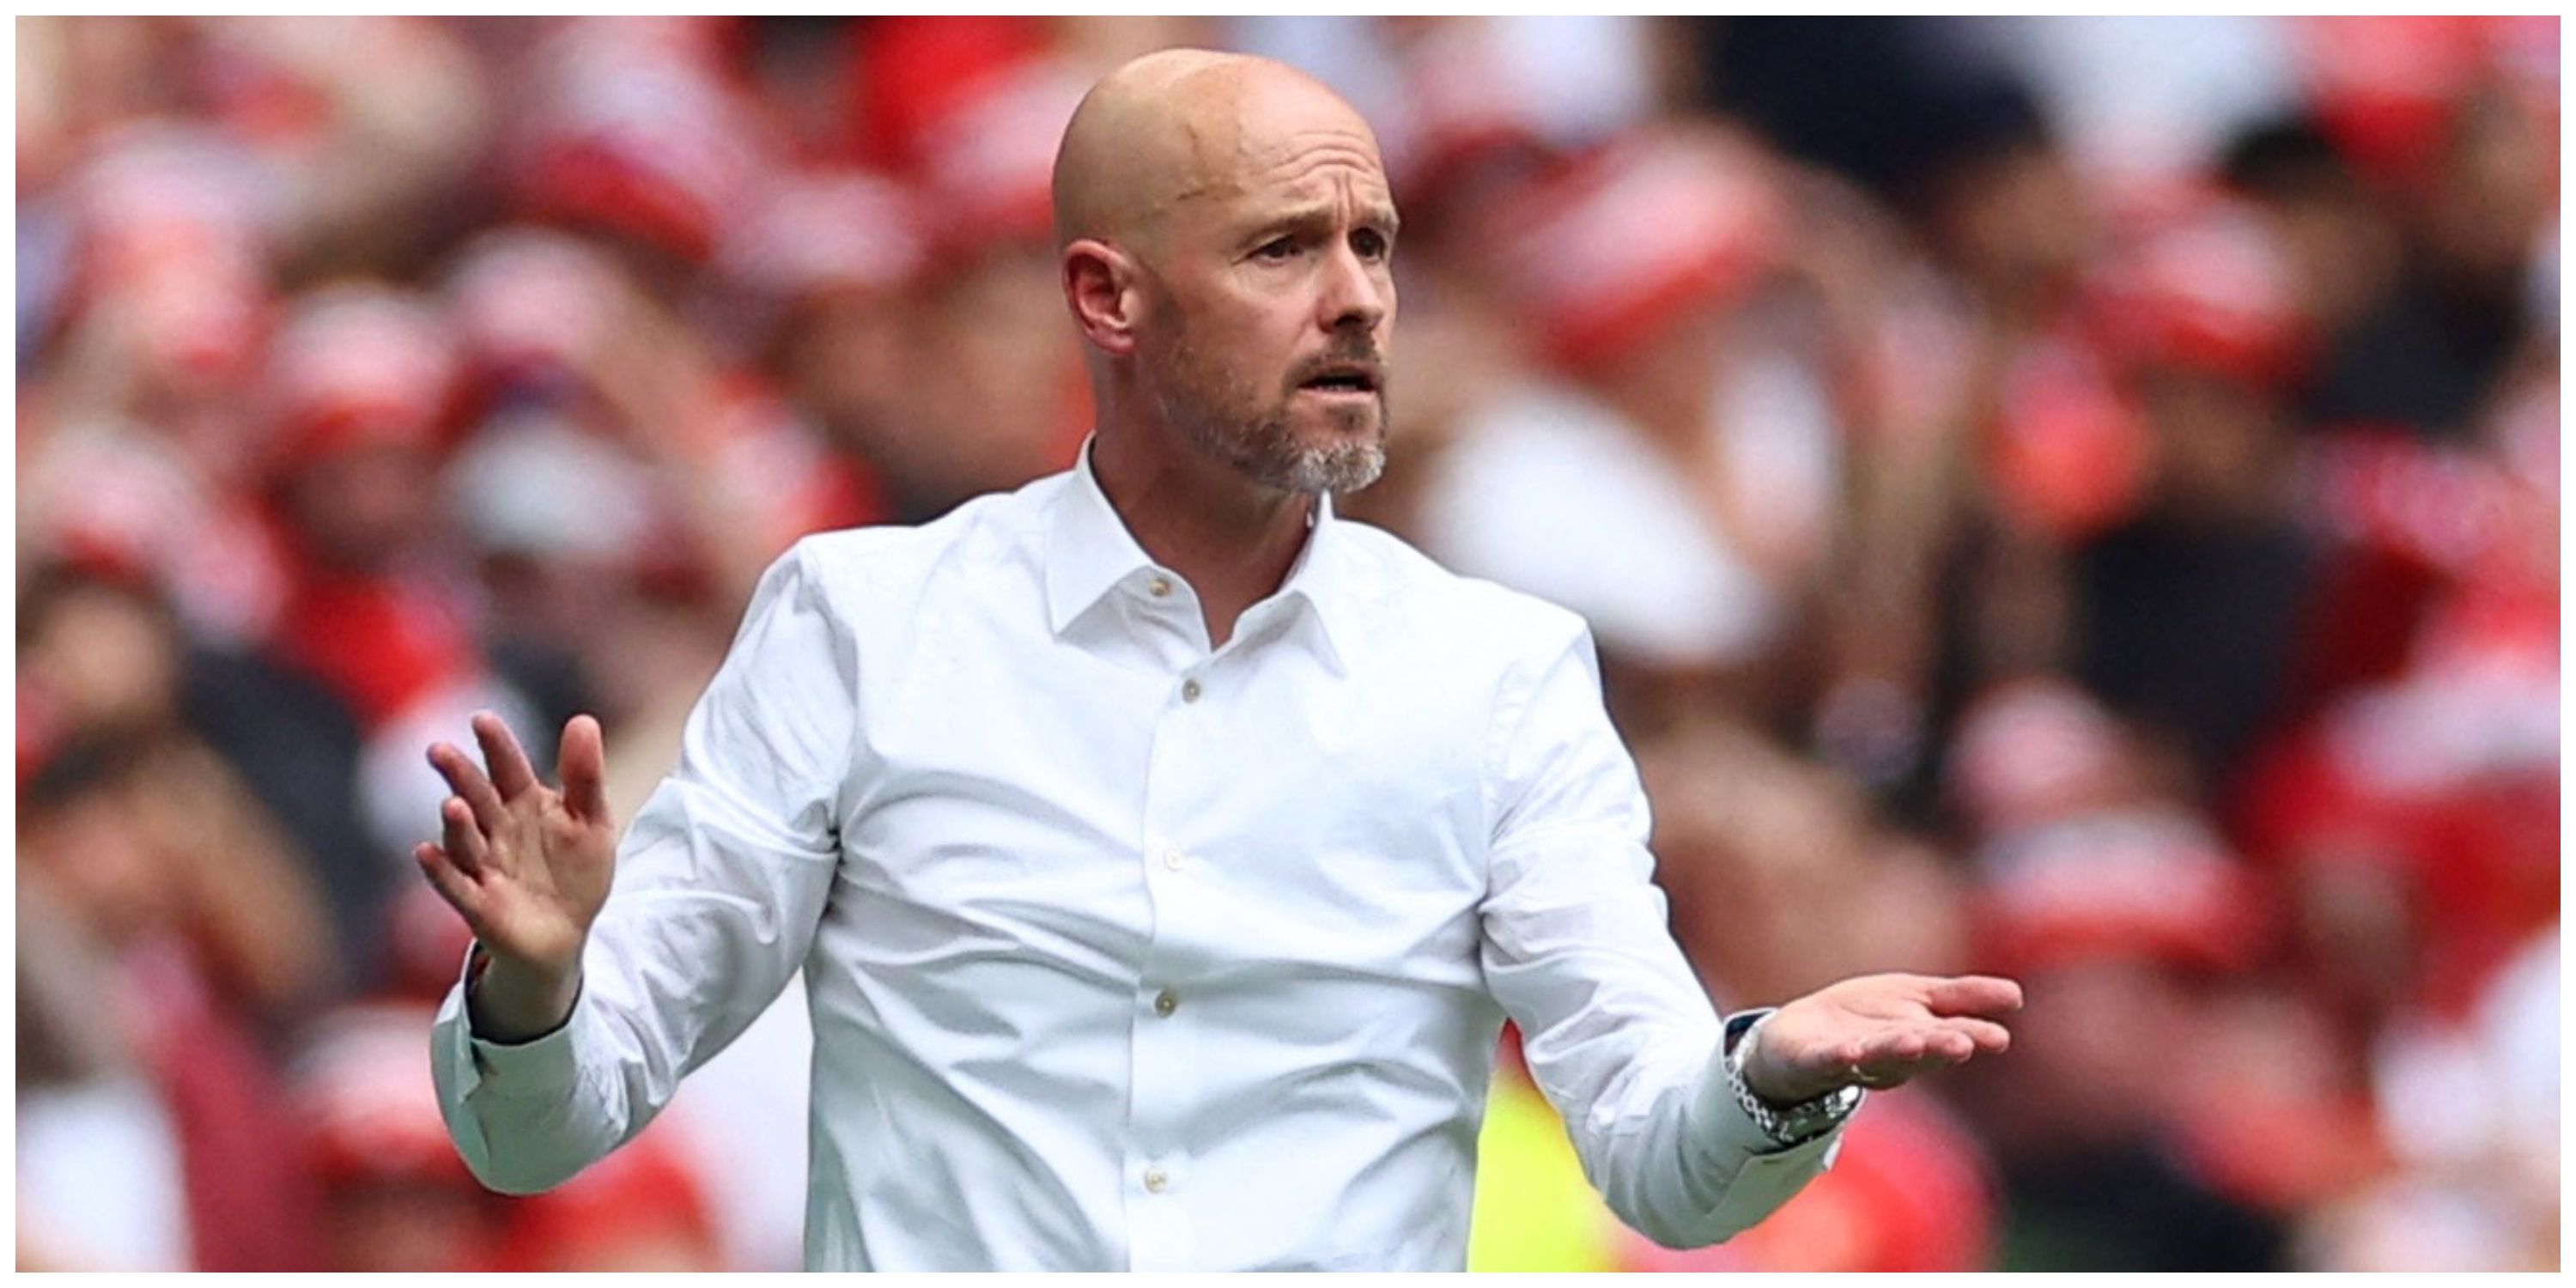 Manchester United manager Erik ten Hag looking confused